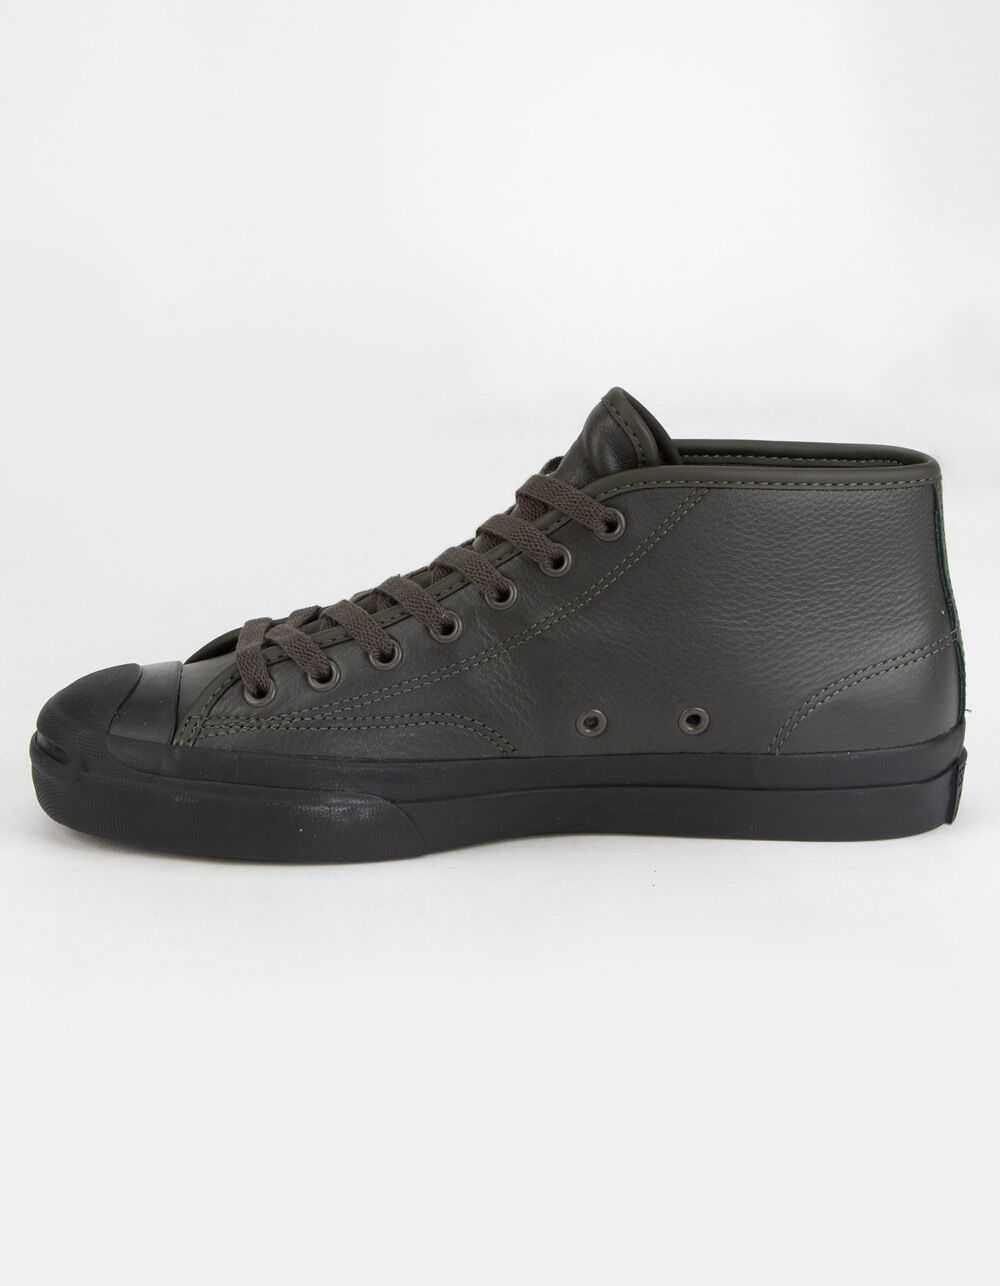 CONVERSE Jake Johnson CONS Jack Purcell Pro Shoes - BLACK COMBO | Tillys